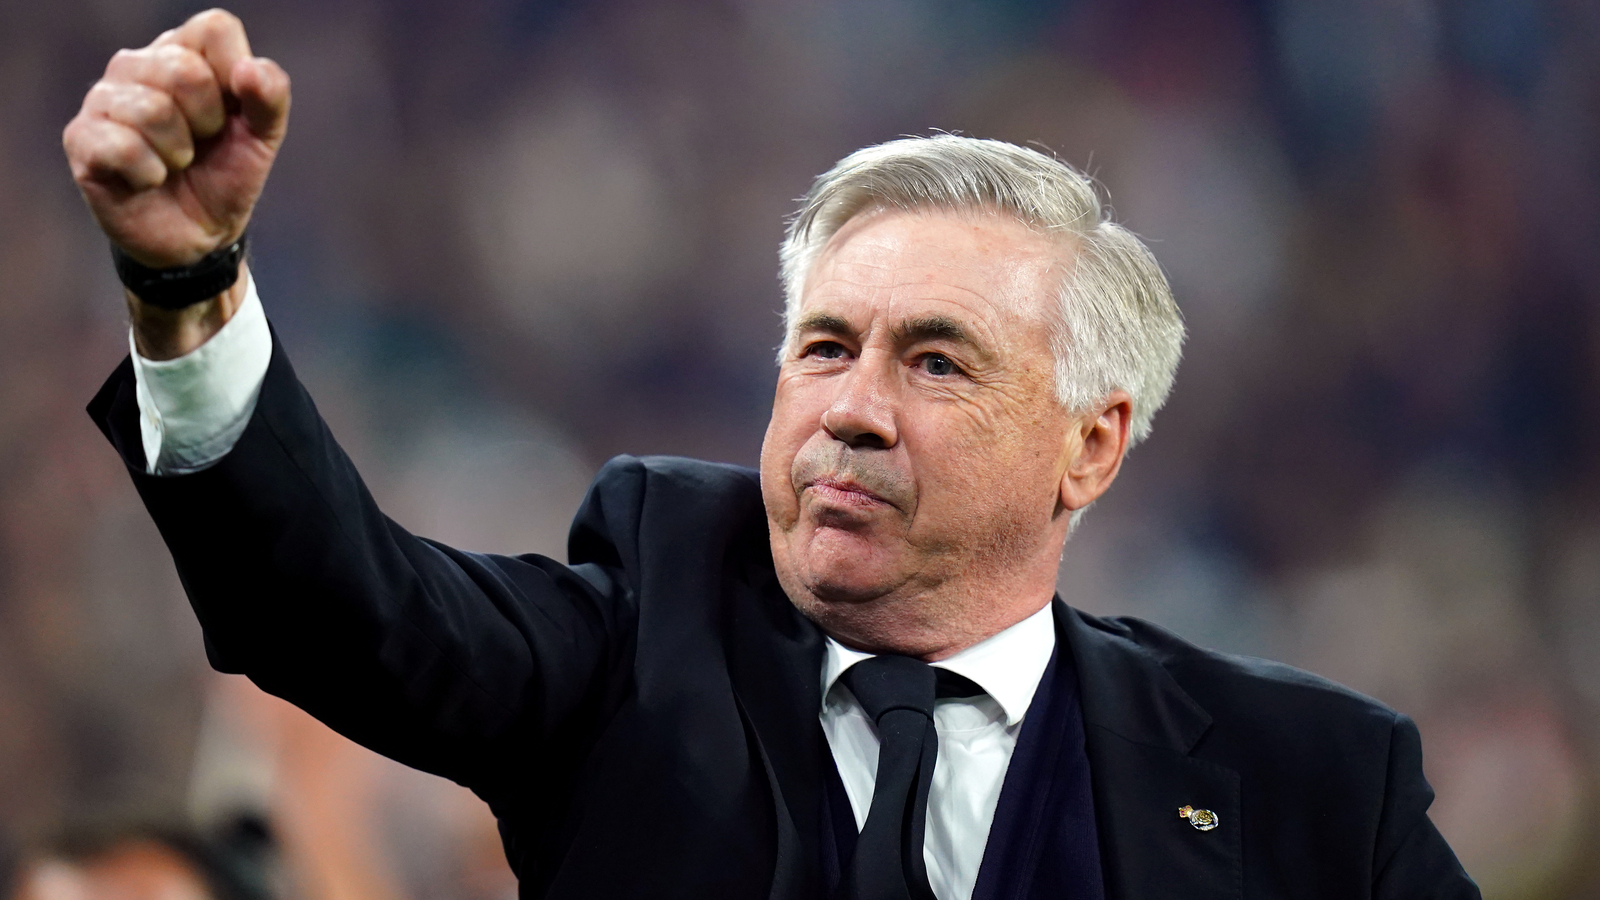 Carlo Ancelotti: Future Coach of Brazil’s National Football Team and Real Madrid’s Current Coach